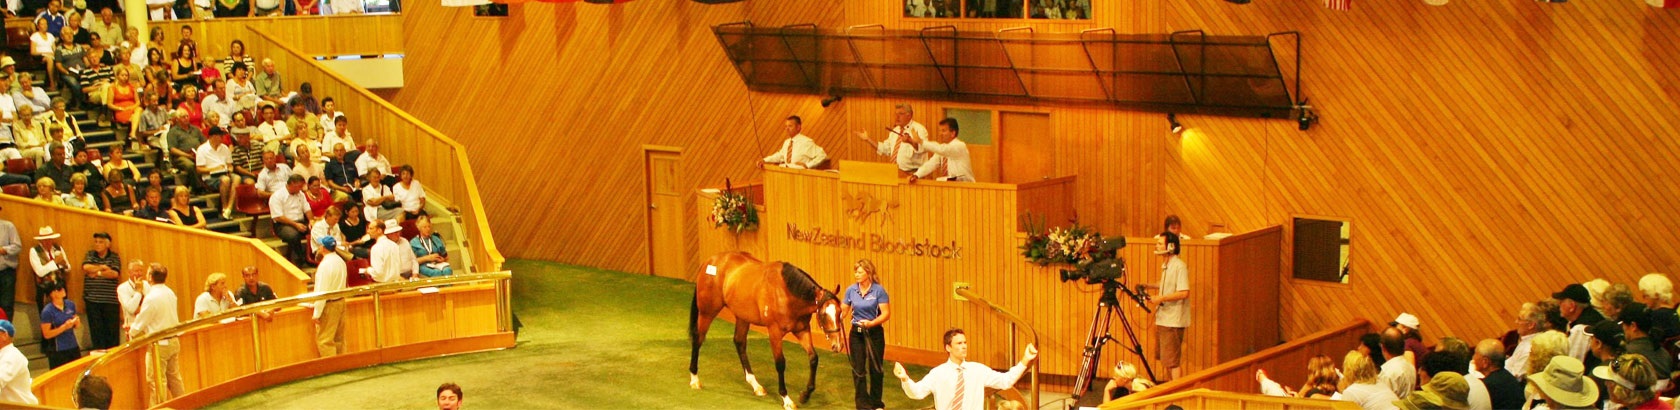 nearco_stud_significant_sales_result2_banner